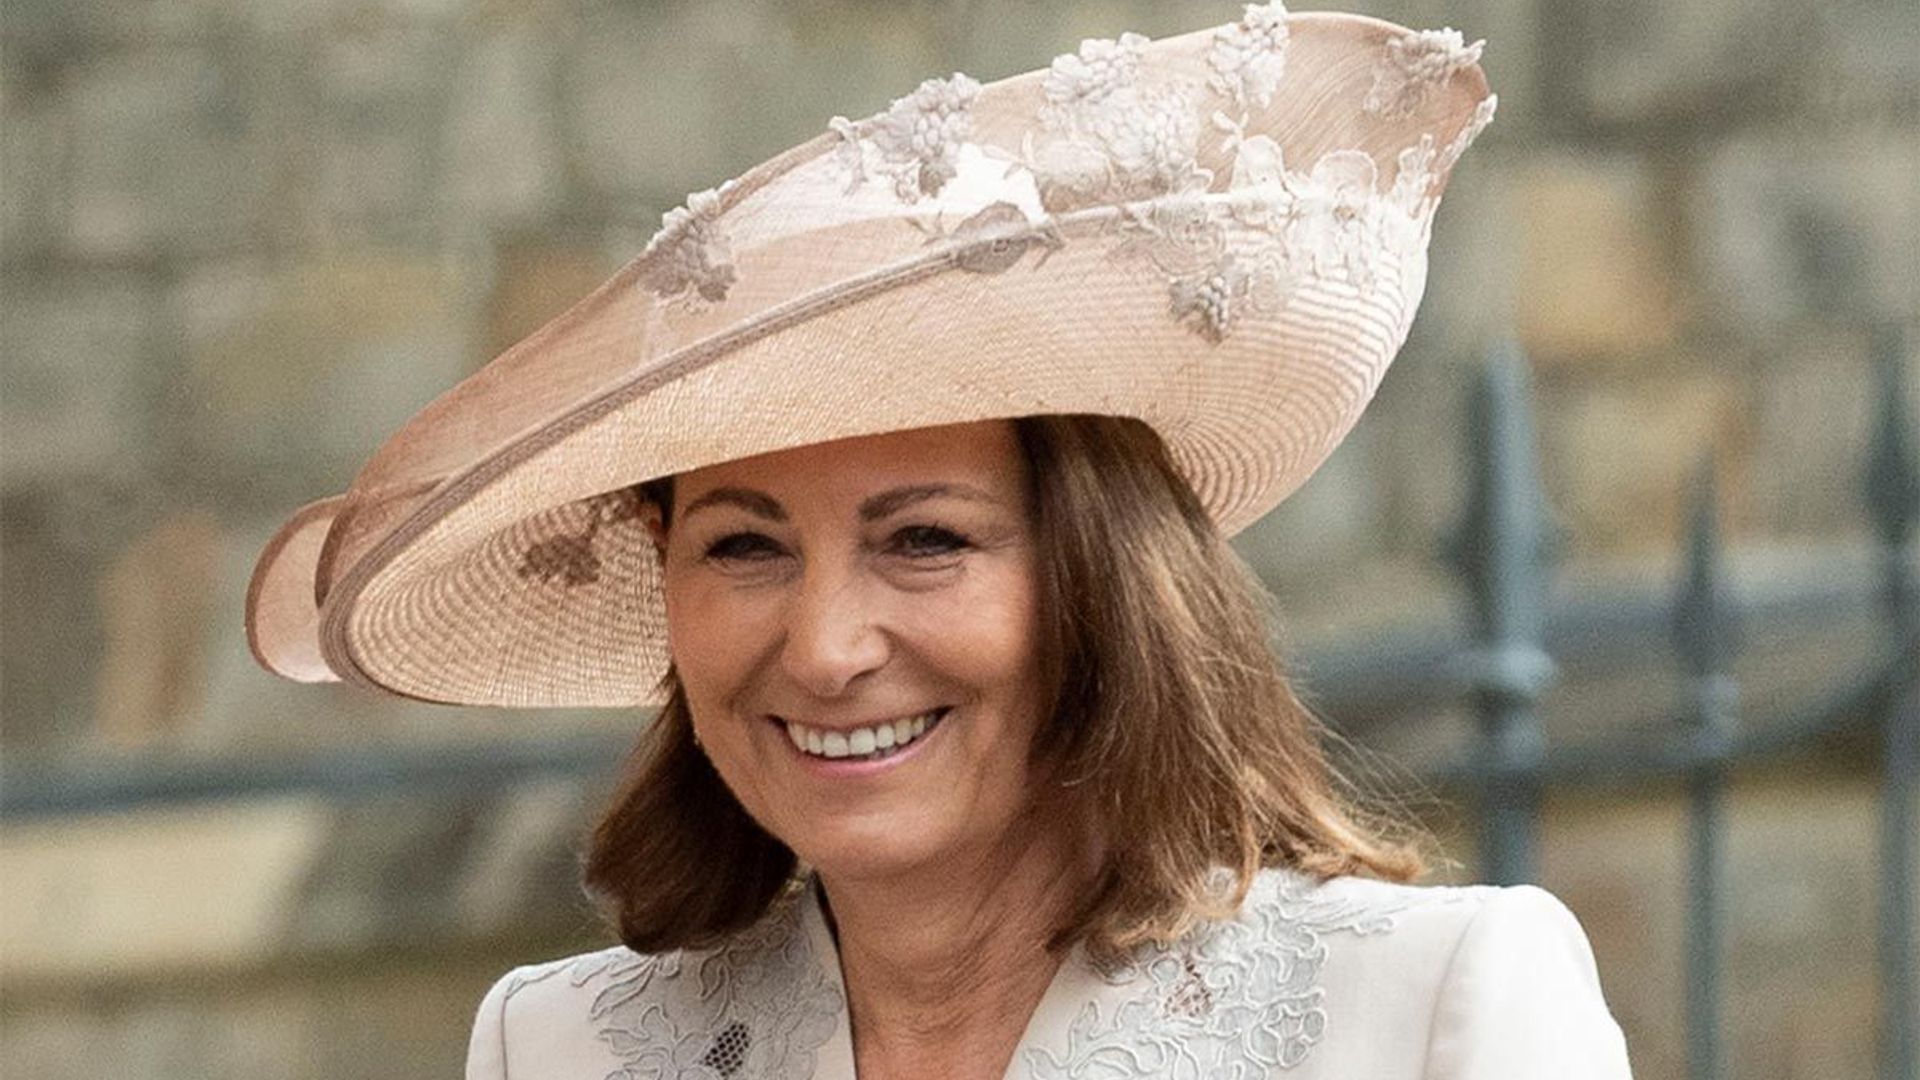 Carole Middleton opens up about family Christmas Eve traditions and shares tips for celebrating the holidays amid COVID-19